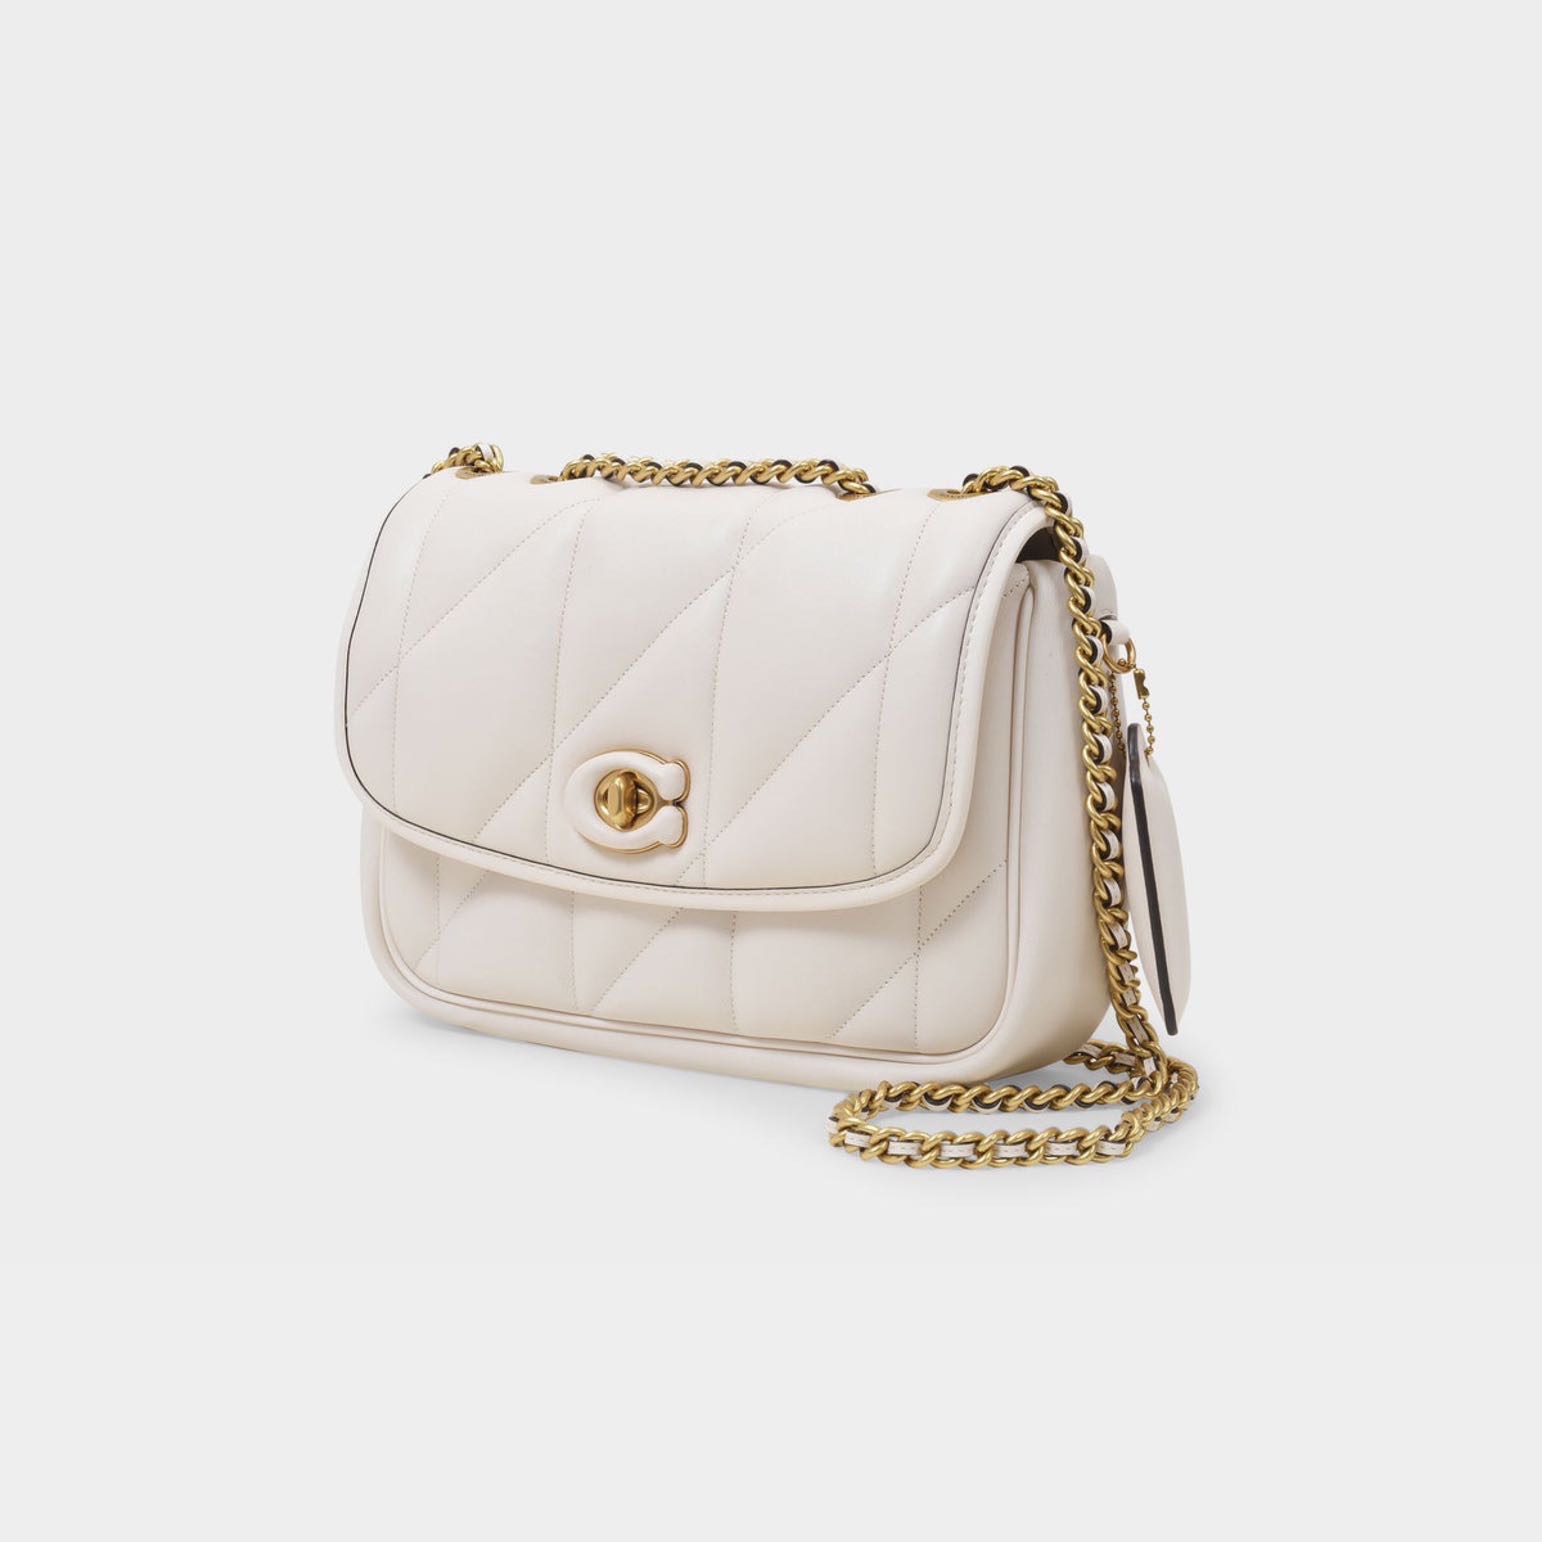 Coach Madison Bag in Beige Leather